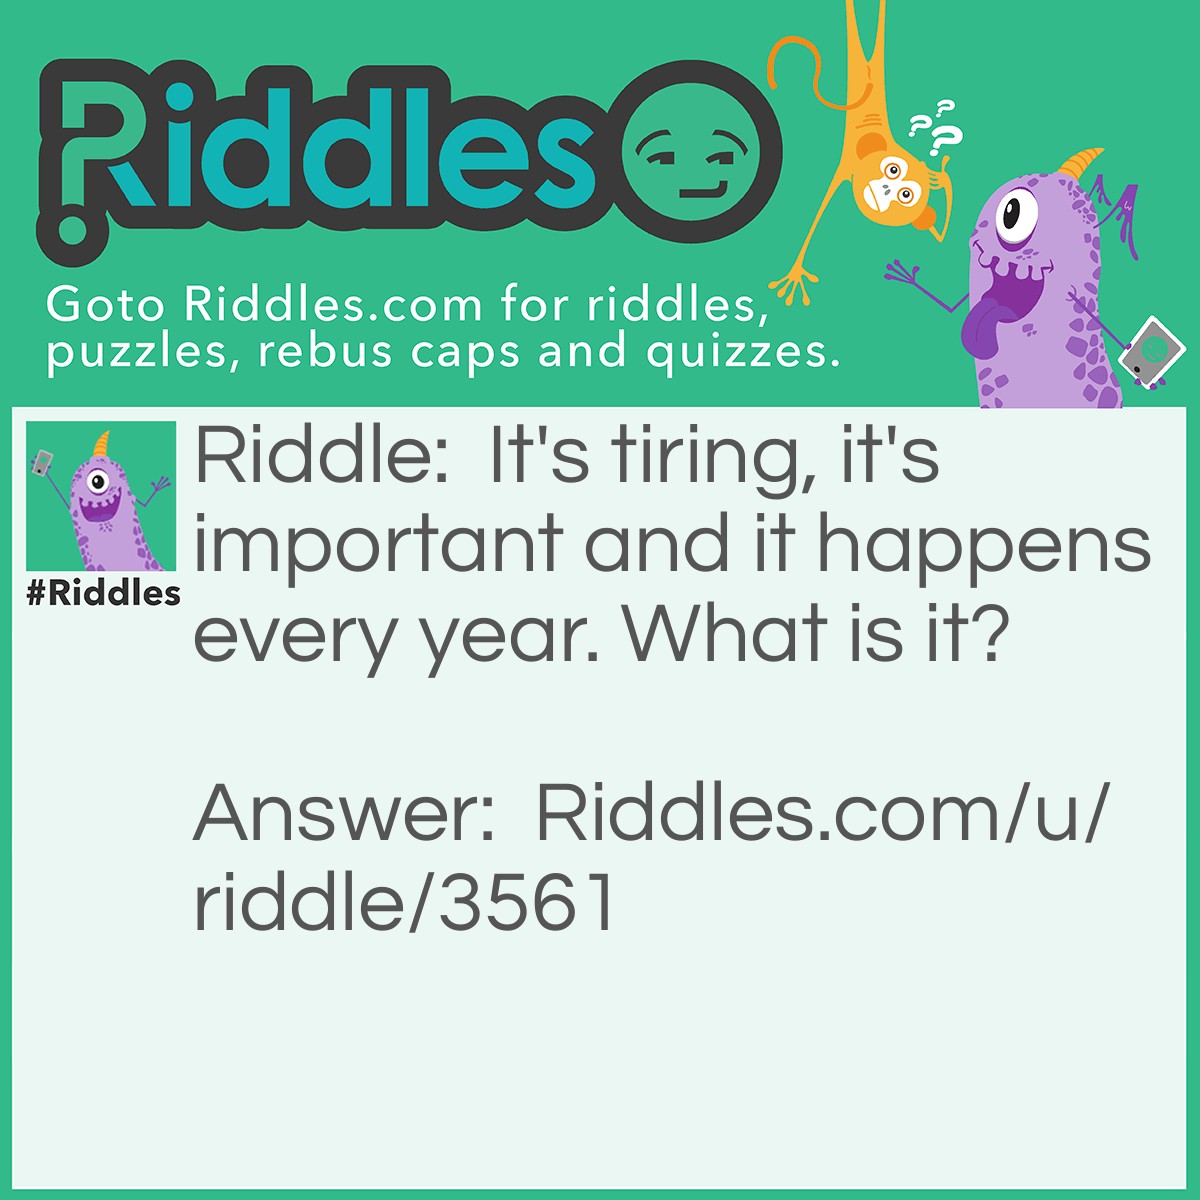 Riddle: It's tiring, it's important and it happens every year. What is it? Answer: Exams.